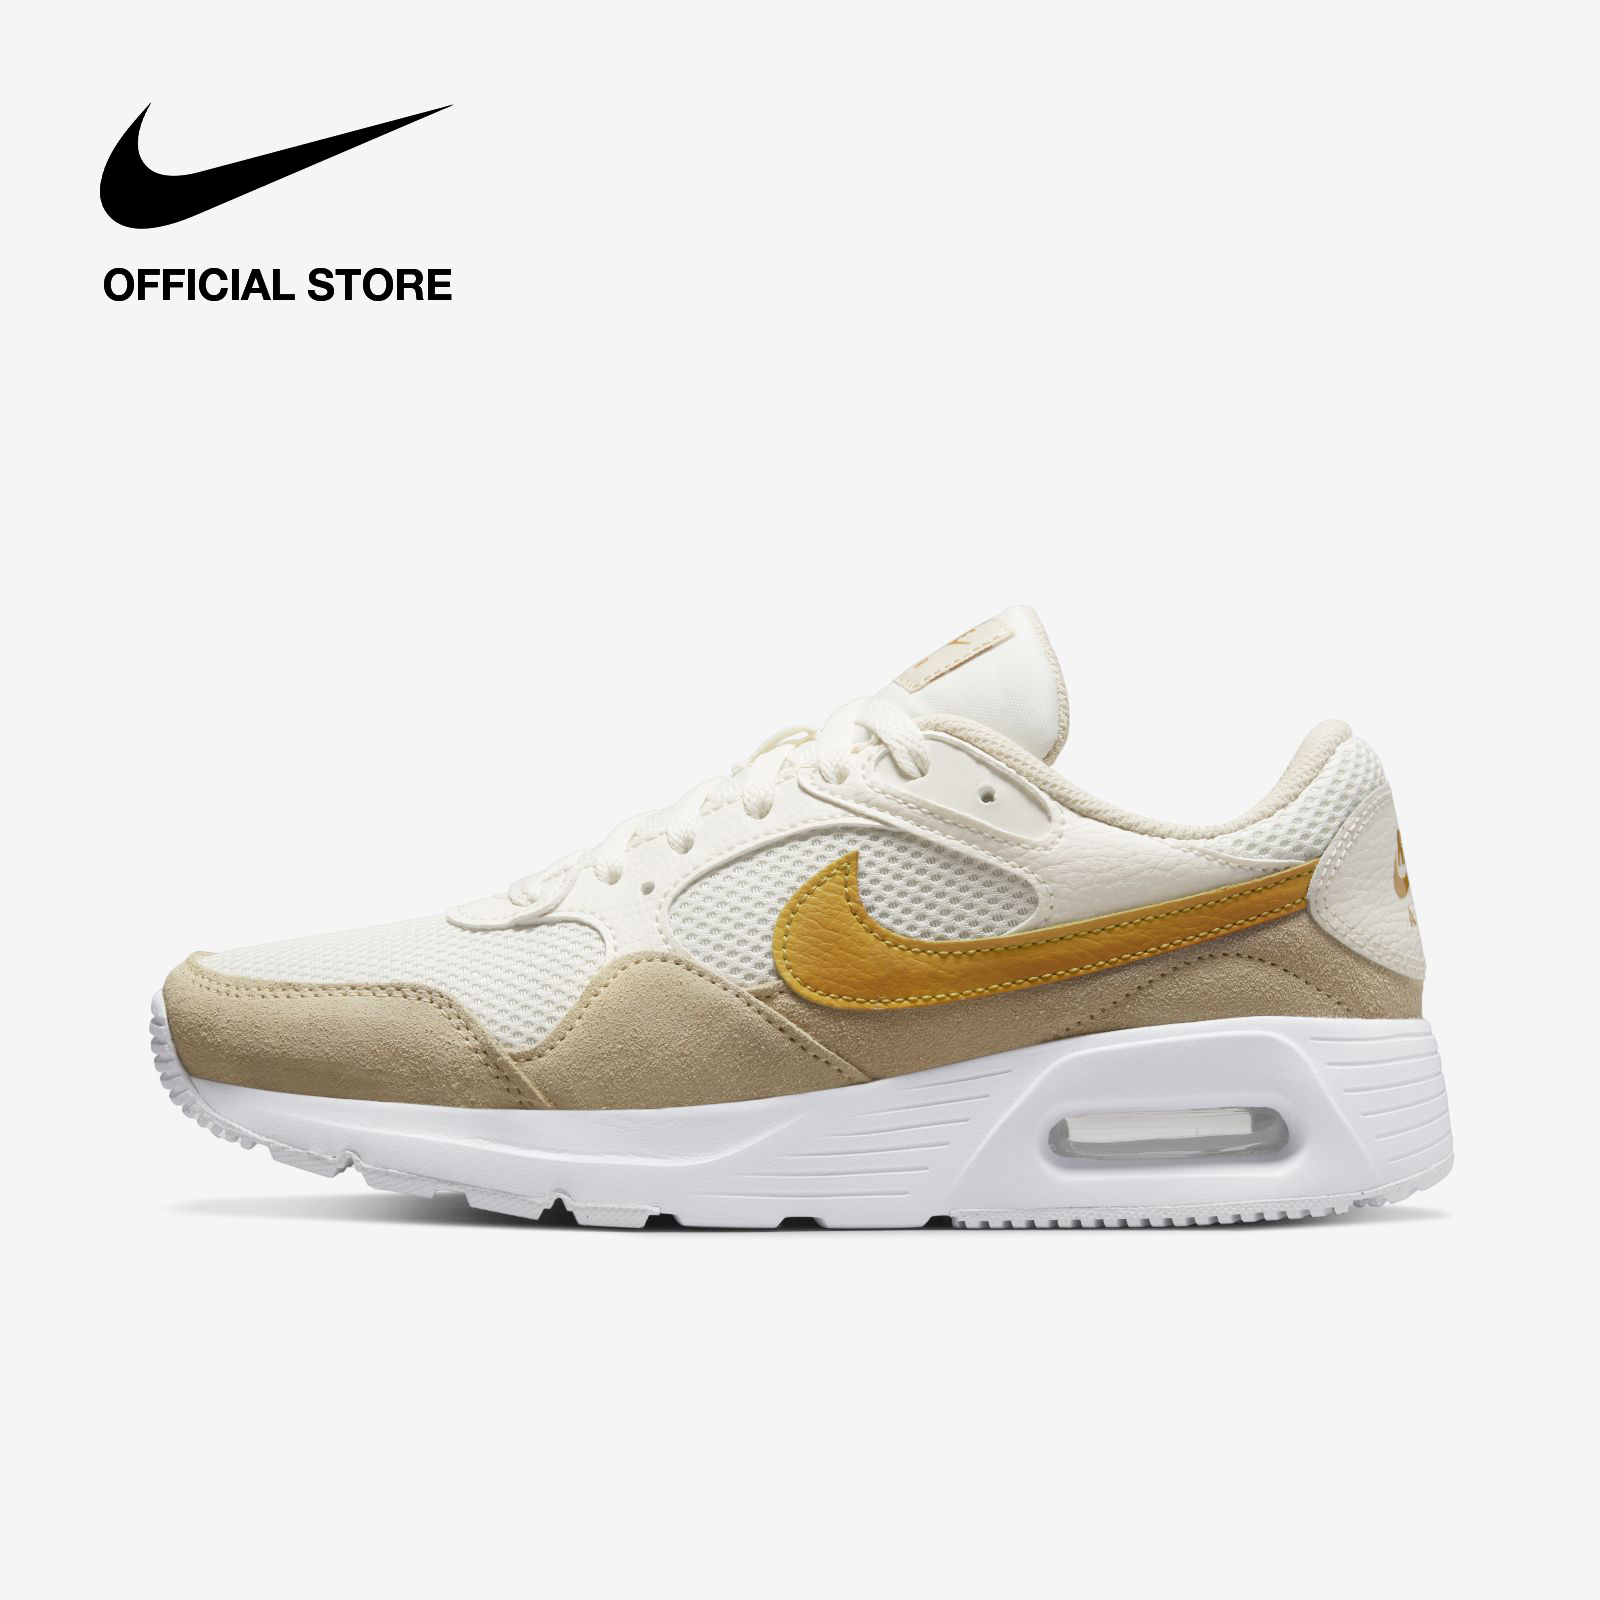 Sneakers For Women Nike - Best Price in Singapore - Aug 2022 | Lazada.sg